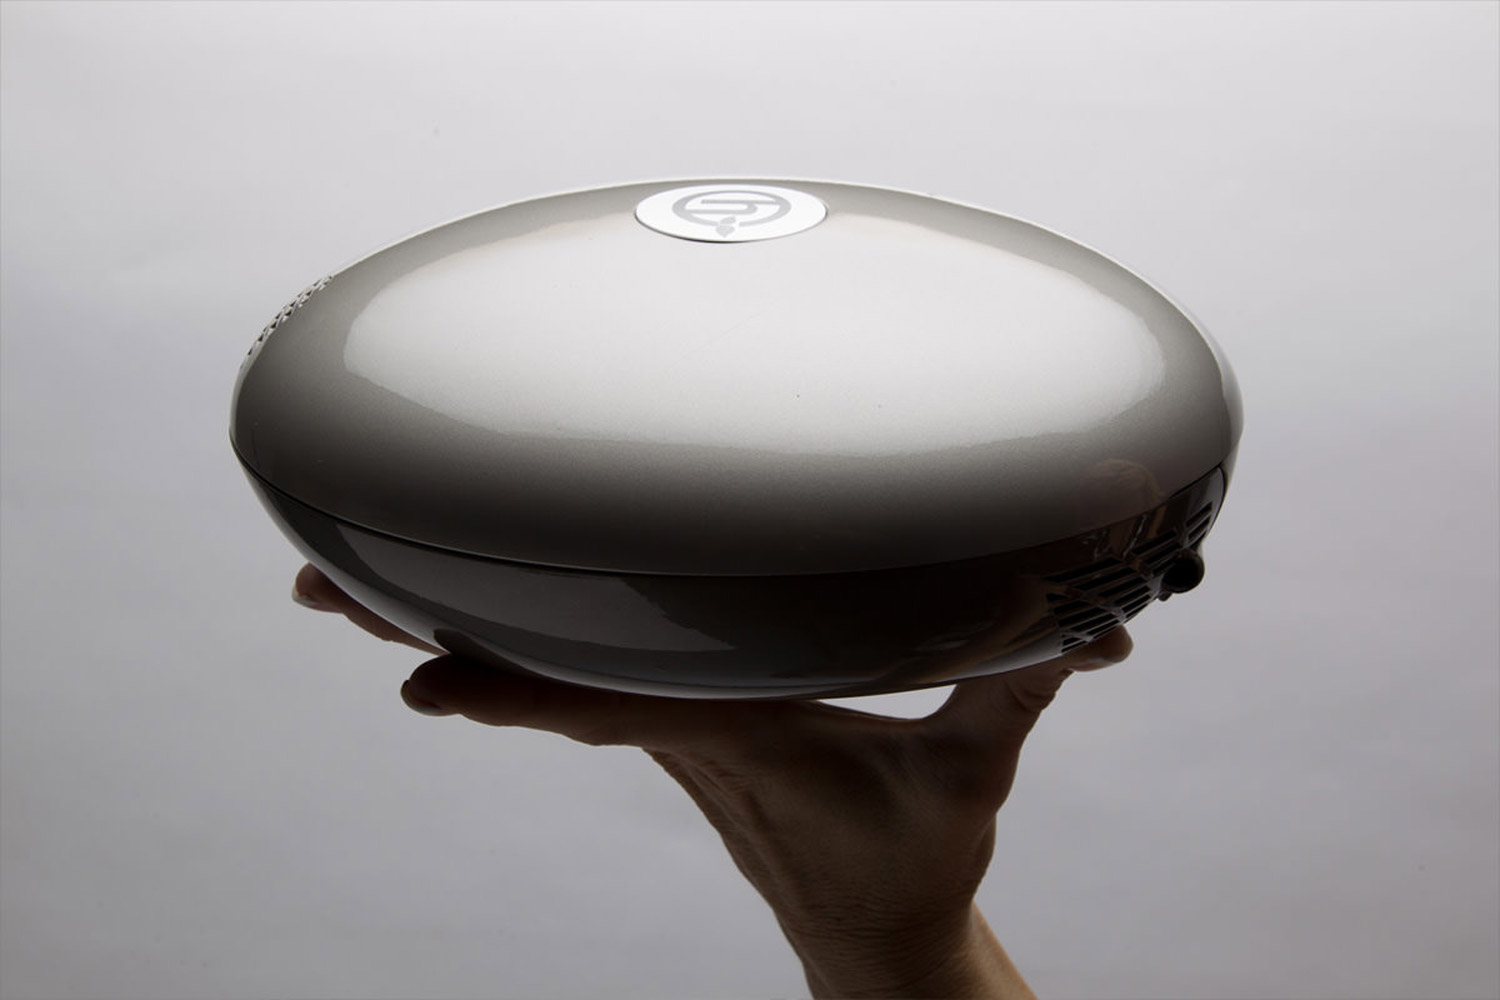 Herbalizer could be smartest vaporizer ever (review)